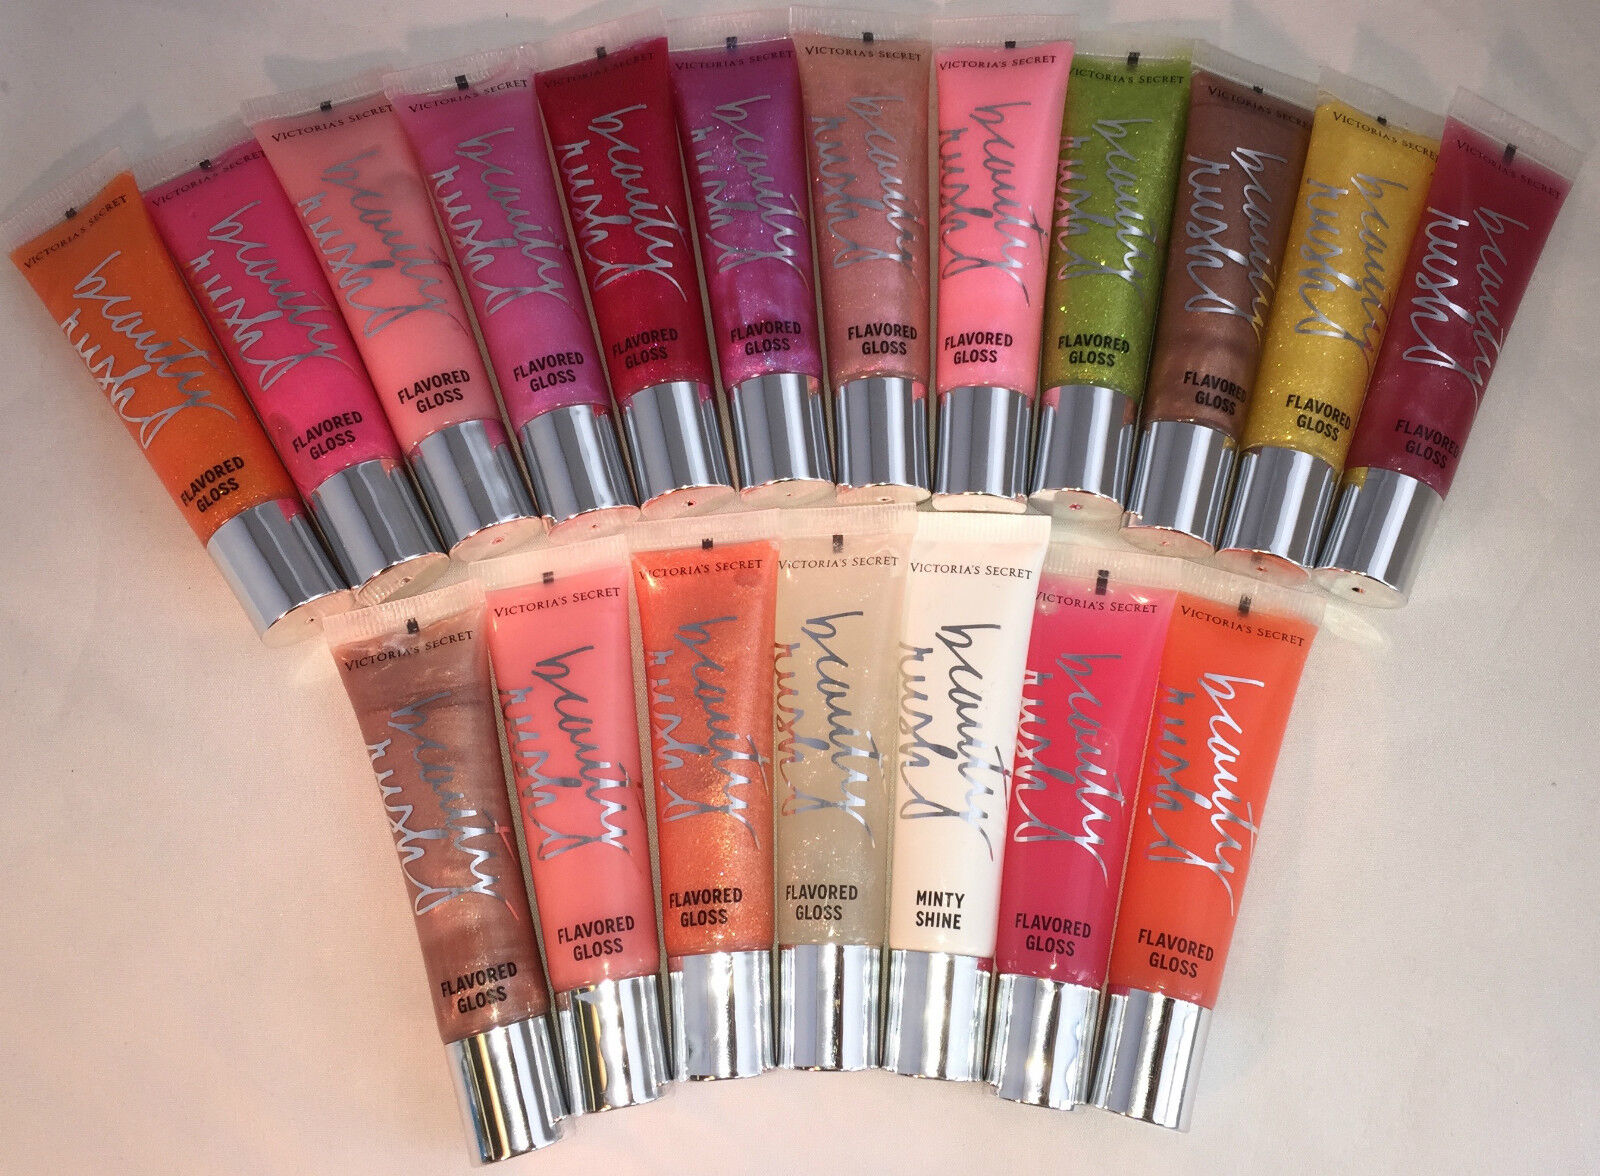 3 Victoria's Secret Beauty Rush Flavored Lip Gloss Squeezed for